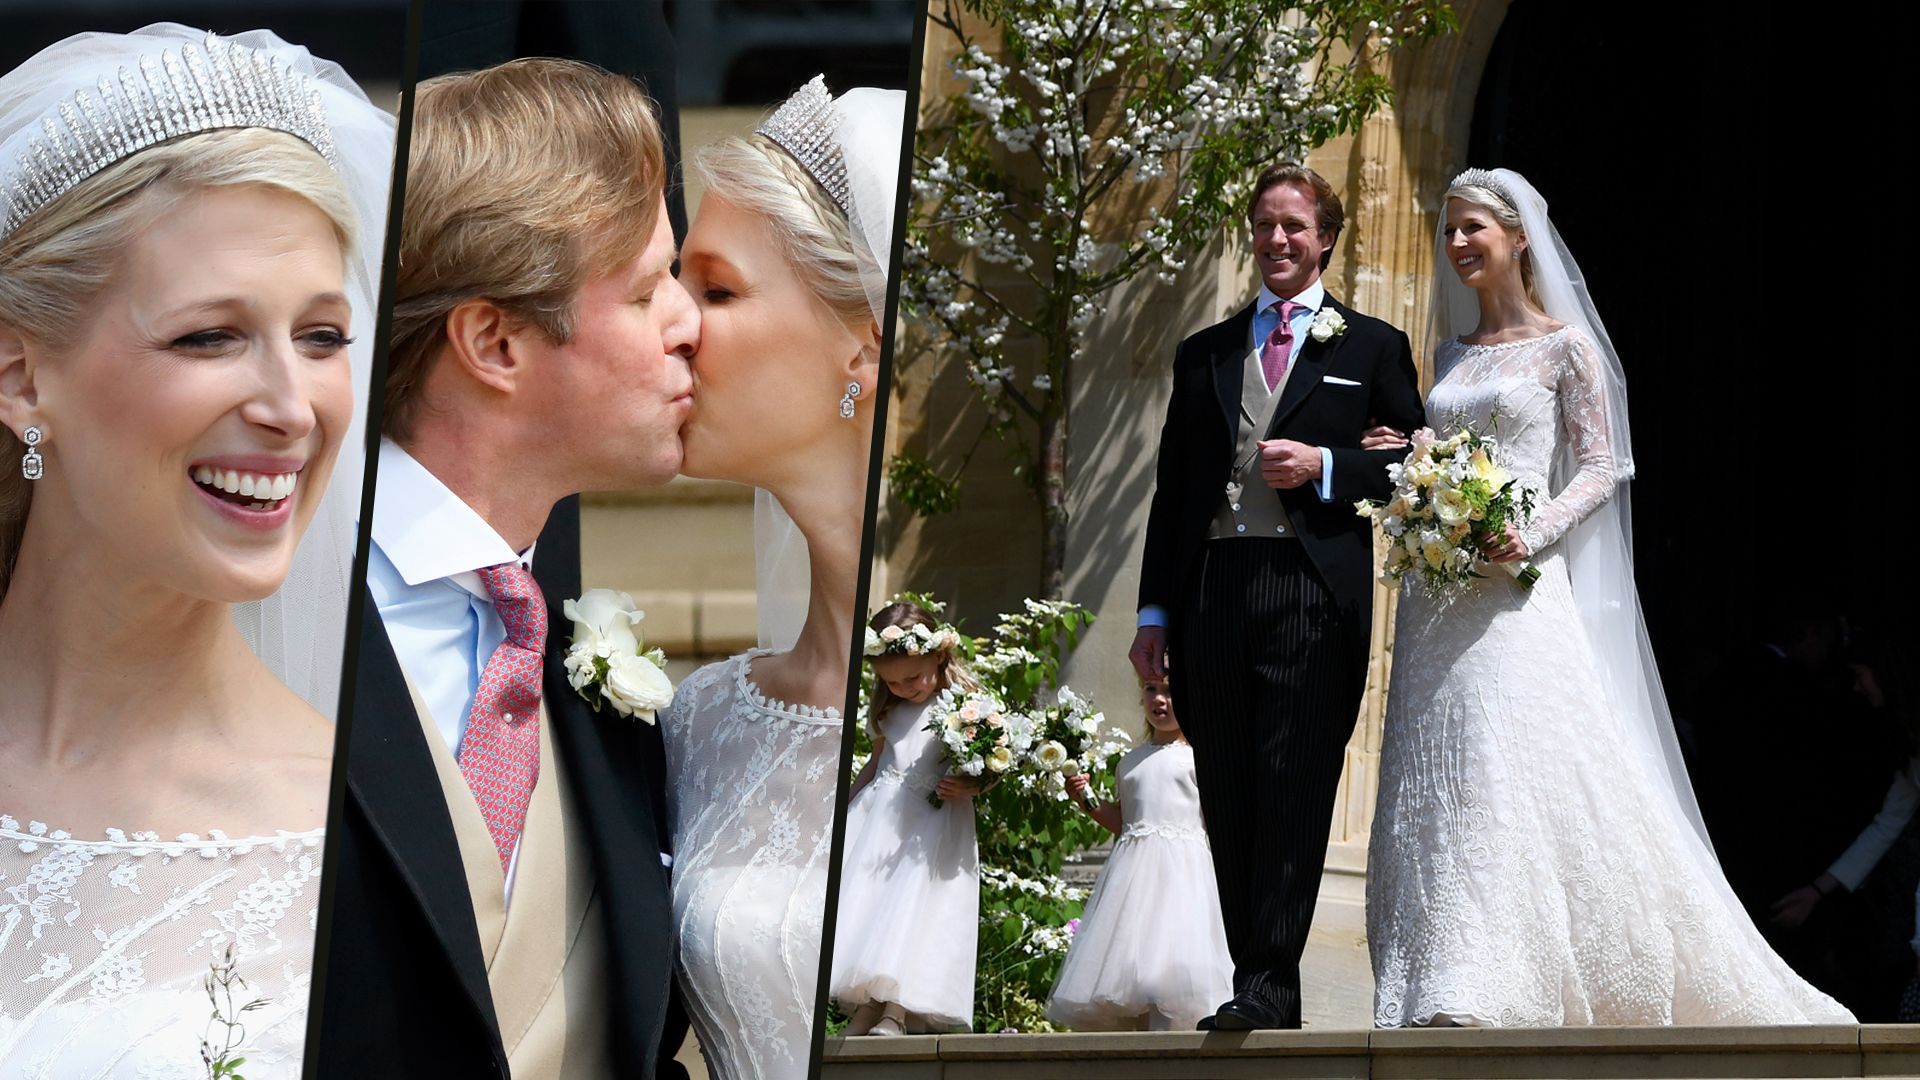 Lady Gabriella Windsor smiling and kissing her husband Thomas Kingston on their wedding day